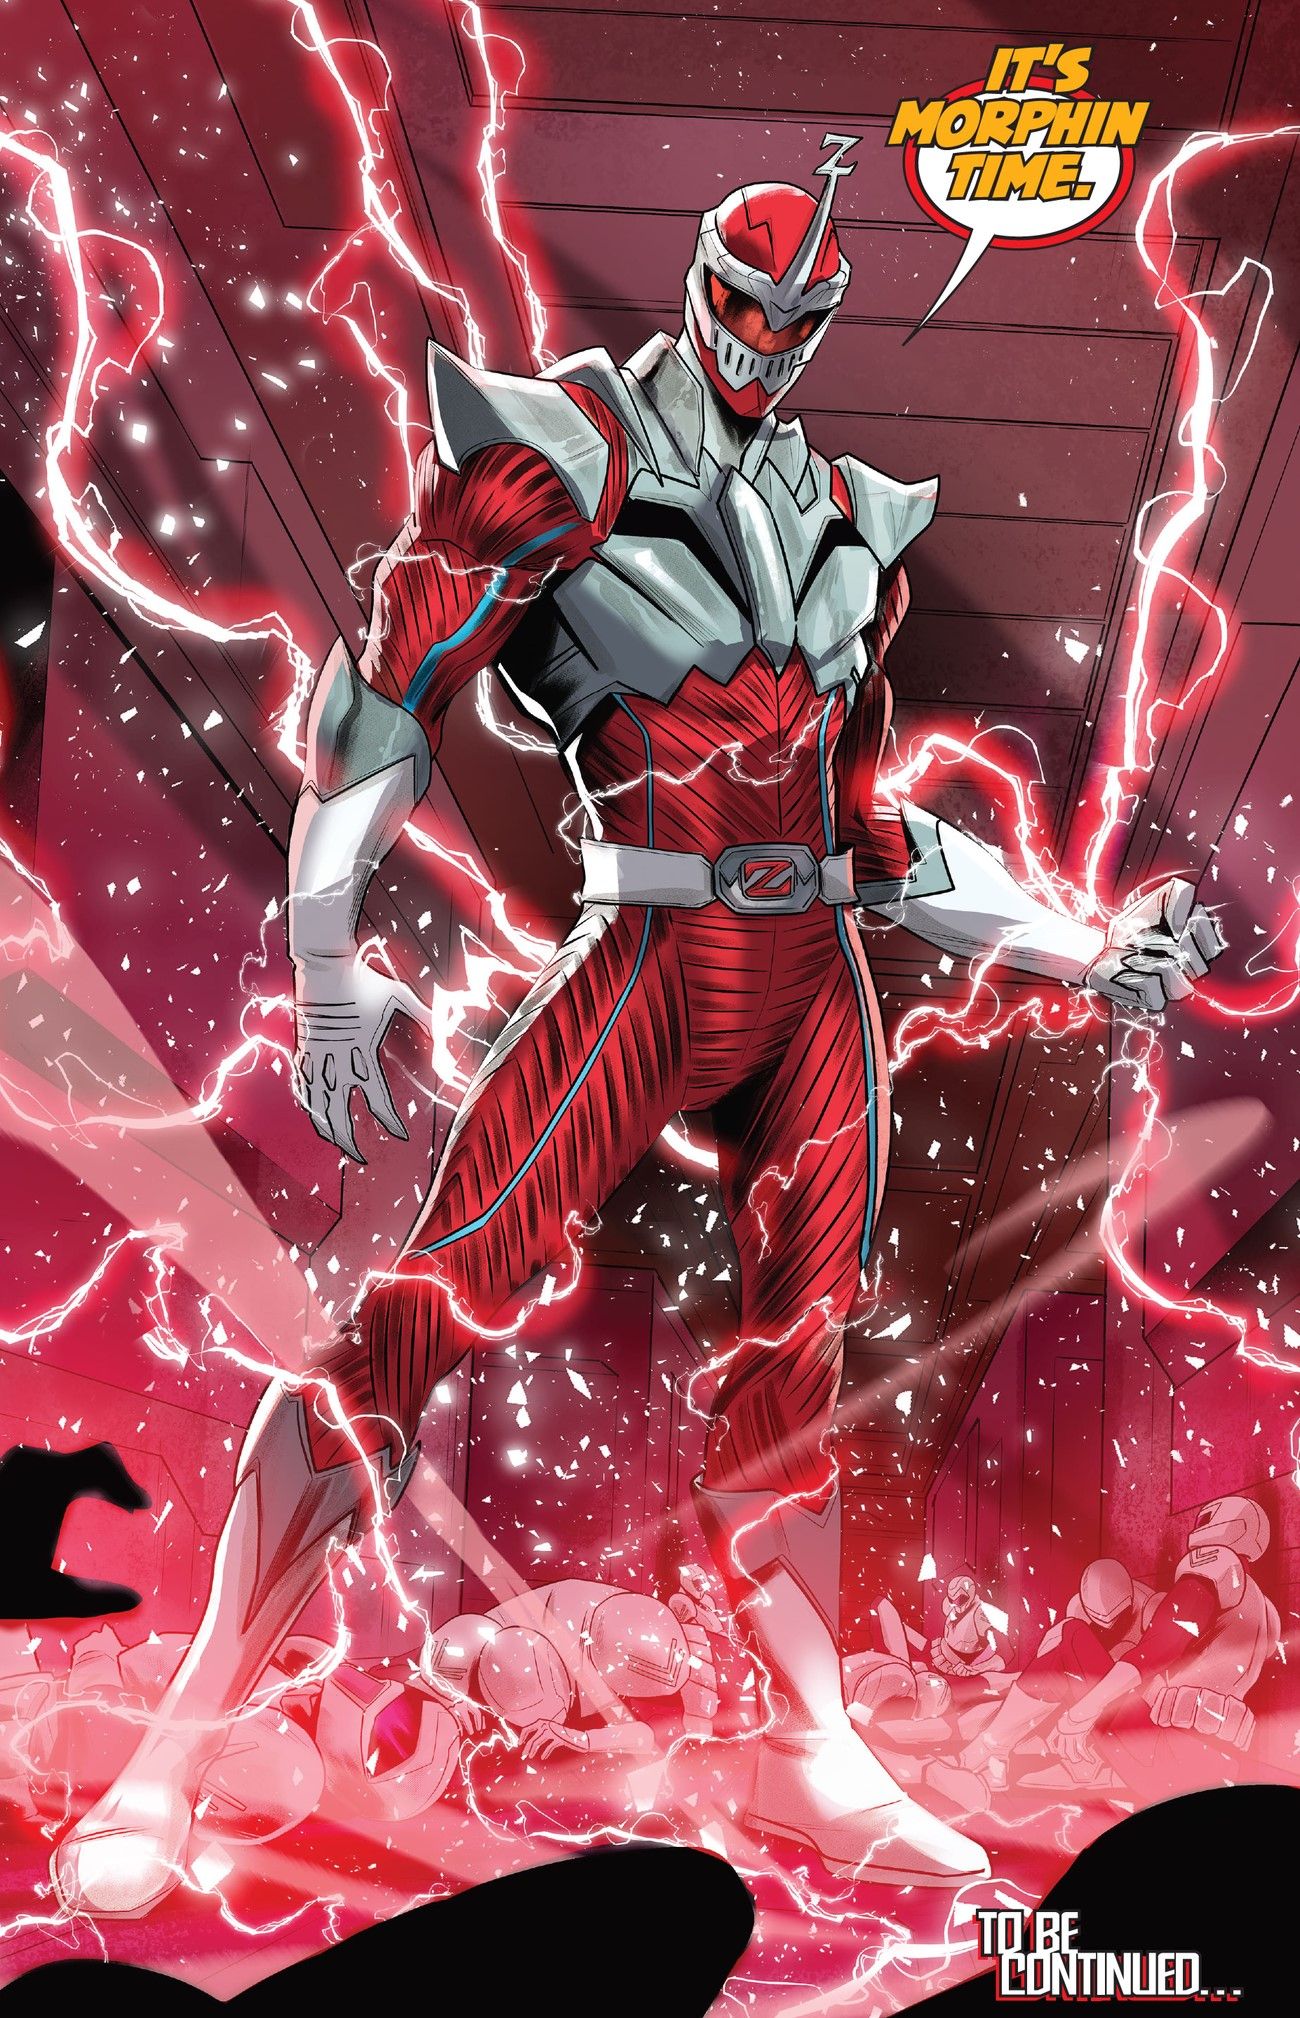 Lord Zedd Joins The Power Rangers, With A Killer New Redesign